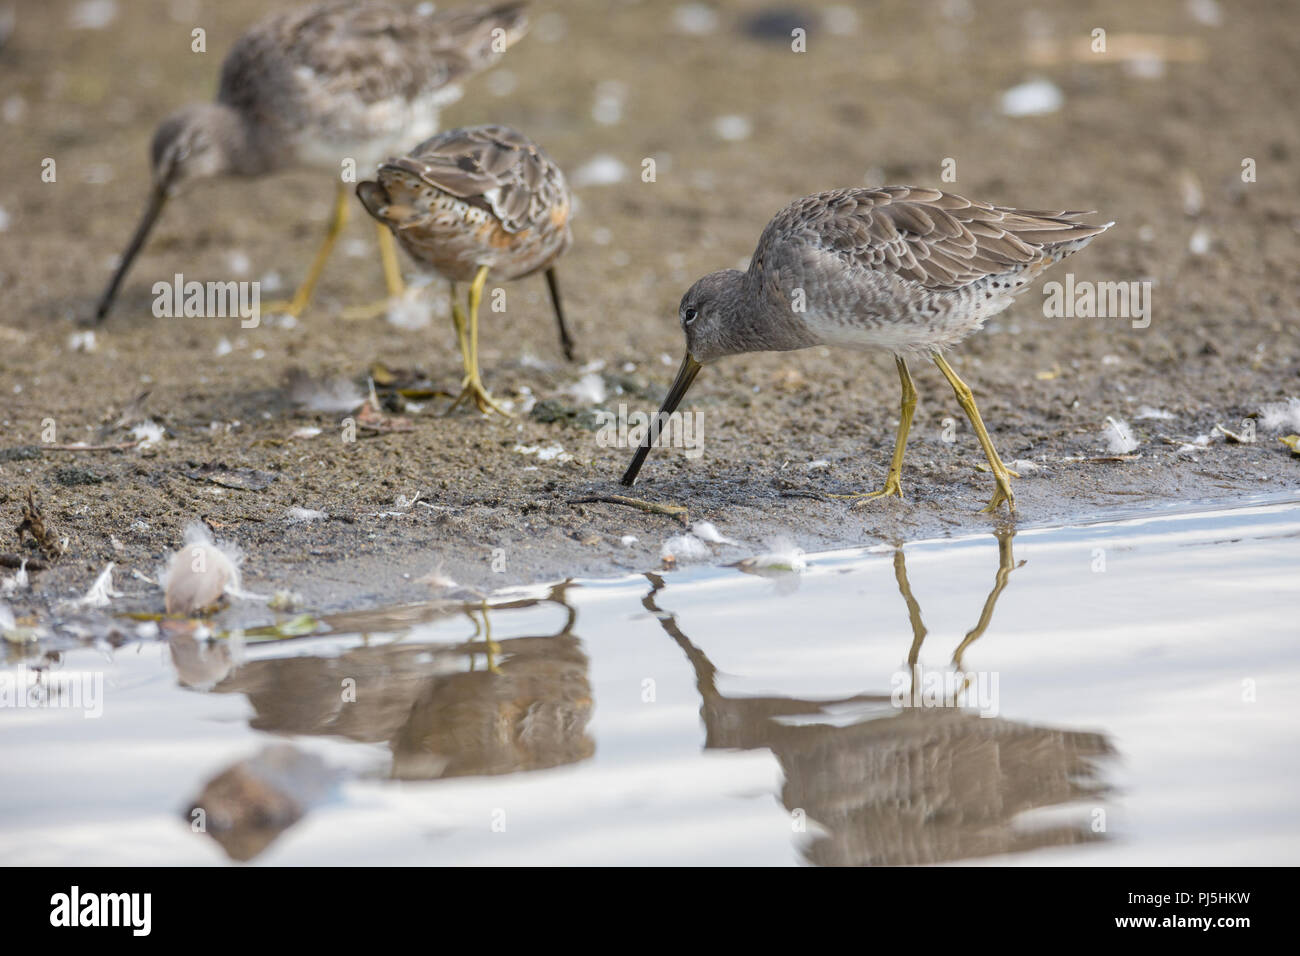 Long-billed dowitcher bird at Vancouver BC Canada Stock Photo